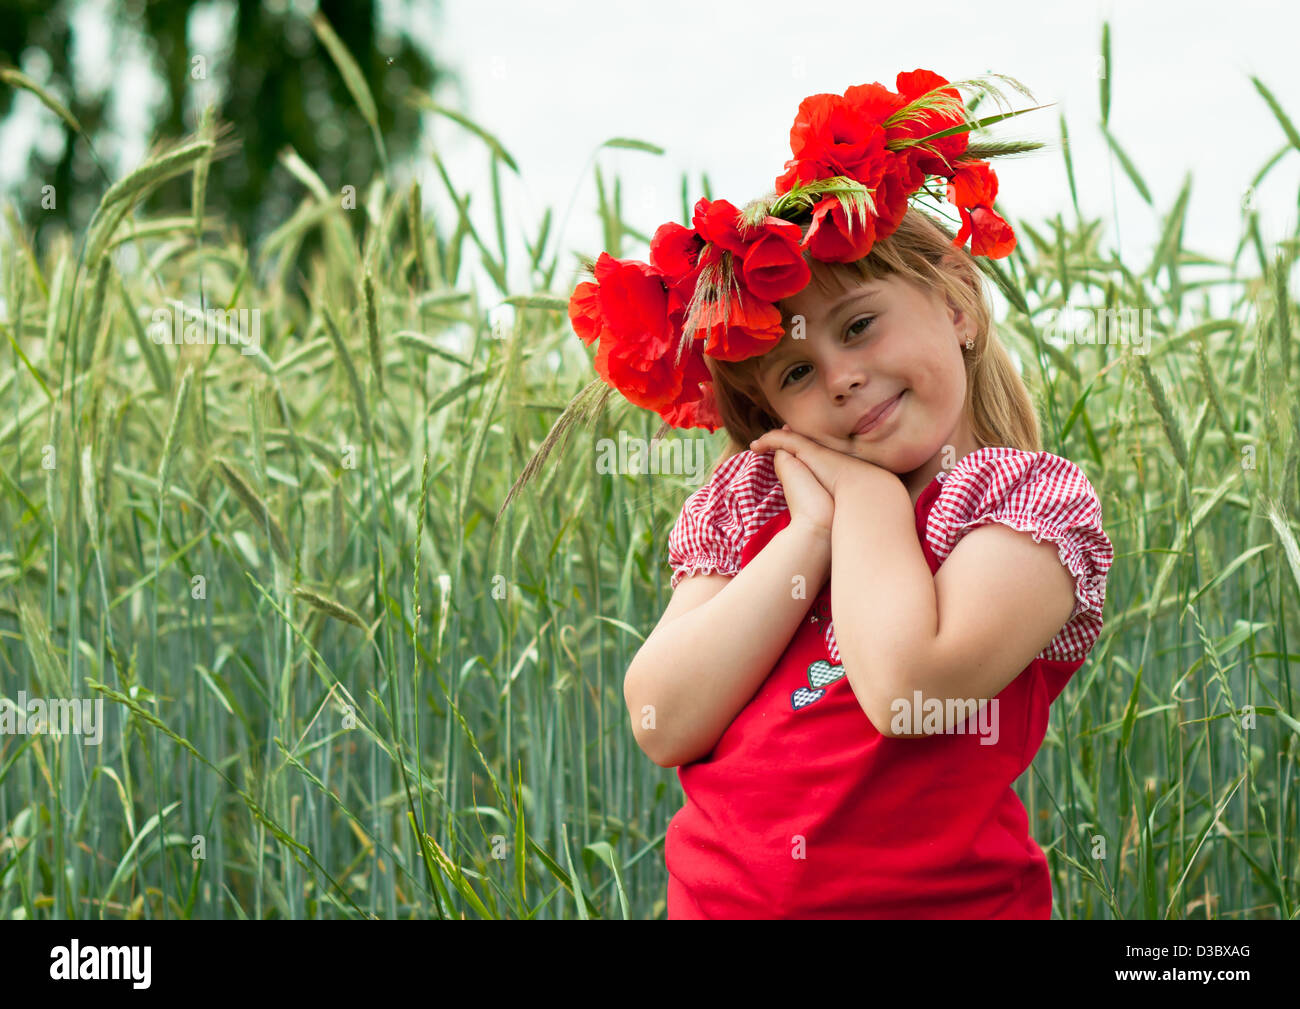 Beauty In Nature, Horizon Over Land, Outdoors, Close-up, Blond Hair, Daughter, Offspring, Poppy, Wheat, Summer, Rural Scene, Stock Photo